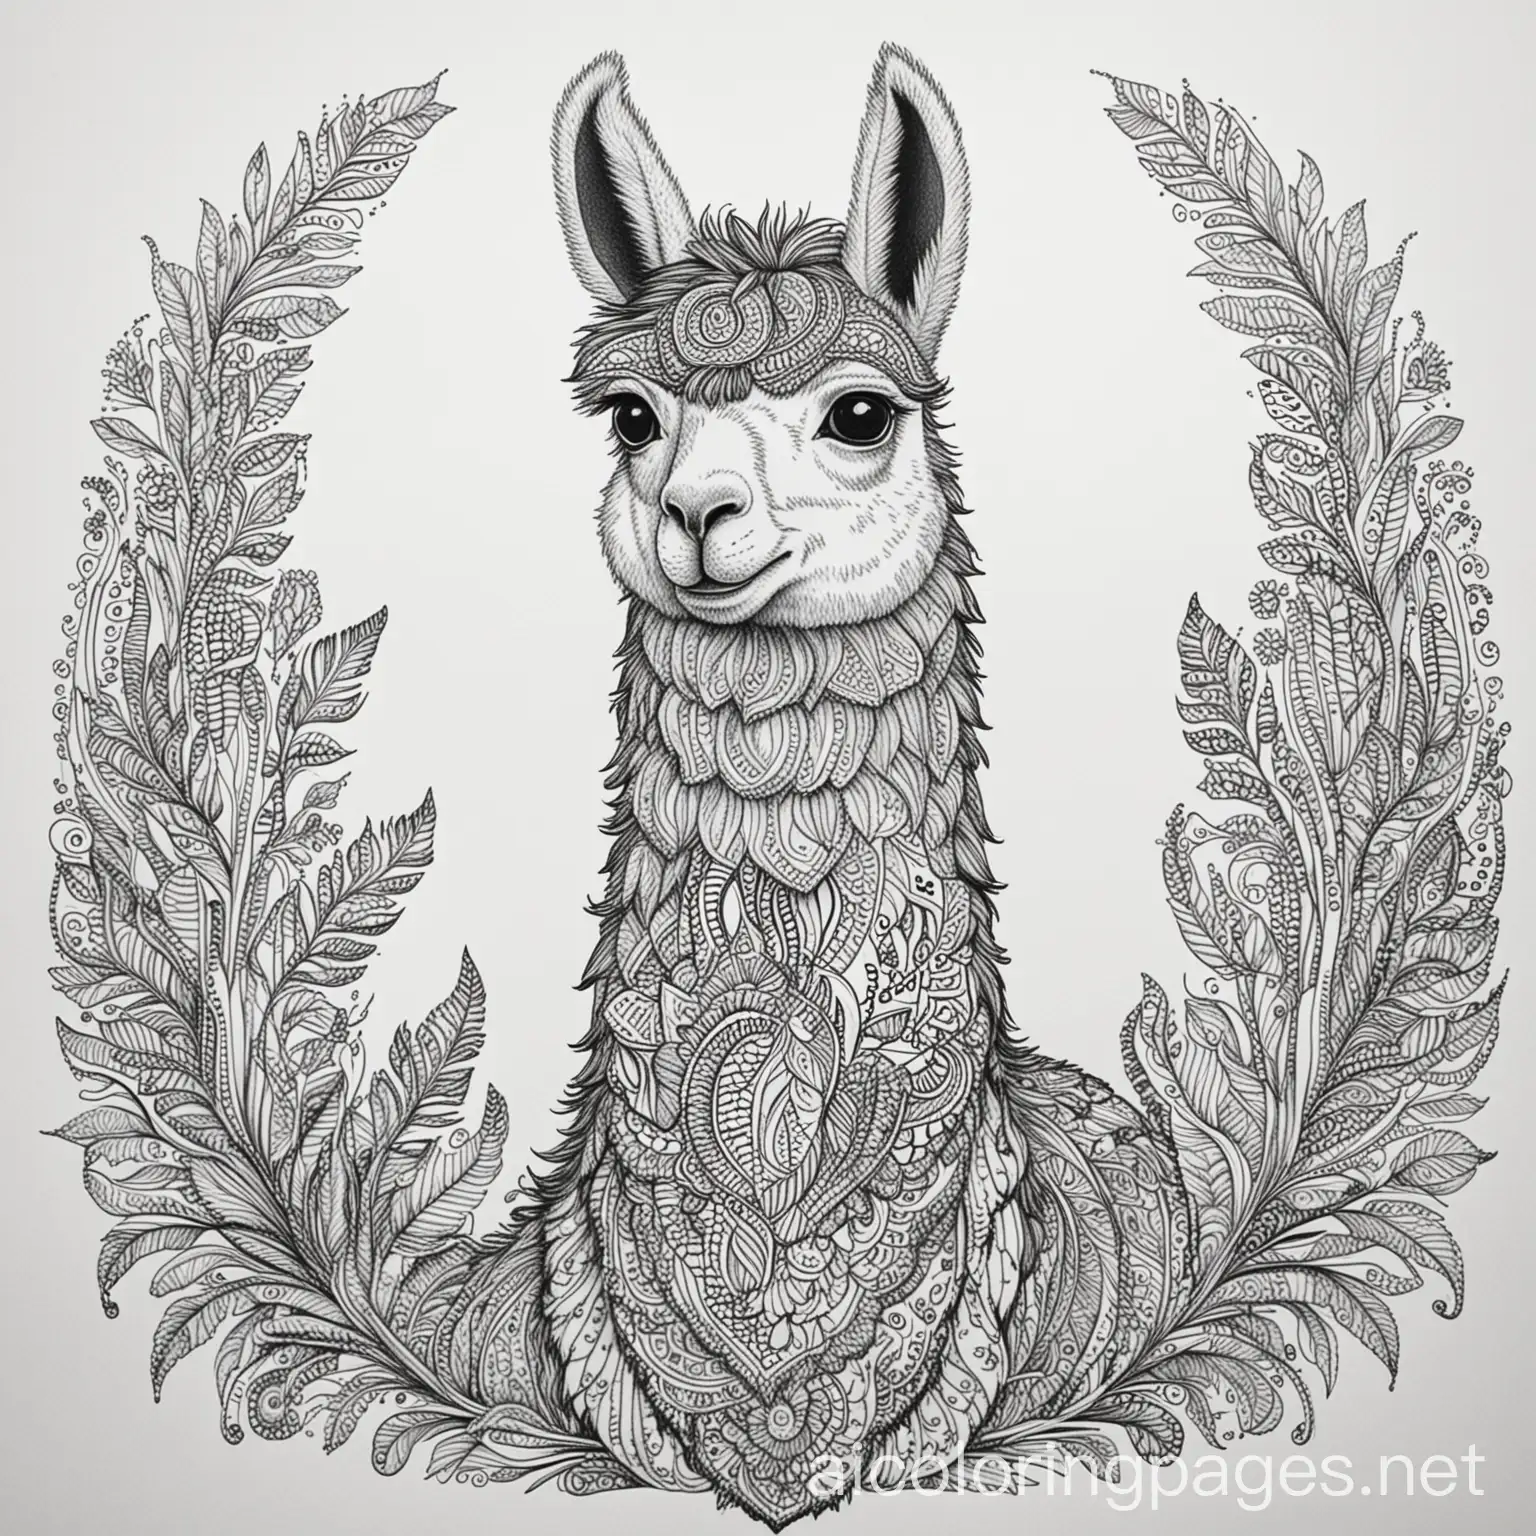 llama with paisley pattern inside, coloring page, black and white, bold marker thick line, no shading, white background, simplicity, ample white space. the outline of the subject easy to distinguish, Coloring Page, black and white, line art, white background, Simplicity, Ample White Space. The background of the coloring page is plain white to make it easy for young children to color within the lines. The outlines of all the subjects are easy to distinguish, making it simple for kids to color without too much difficulty